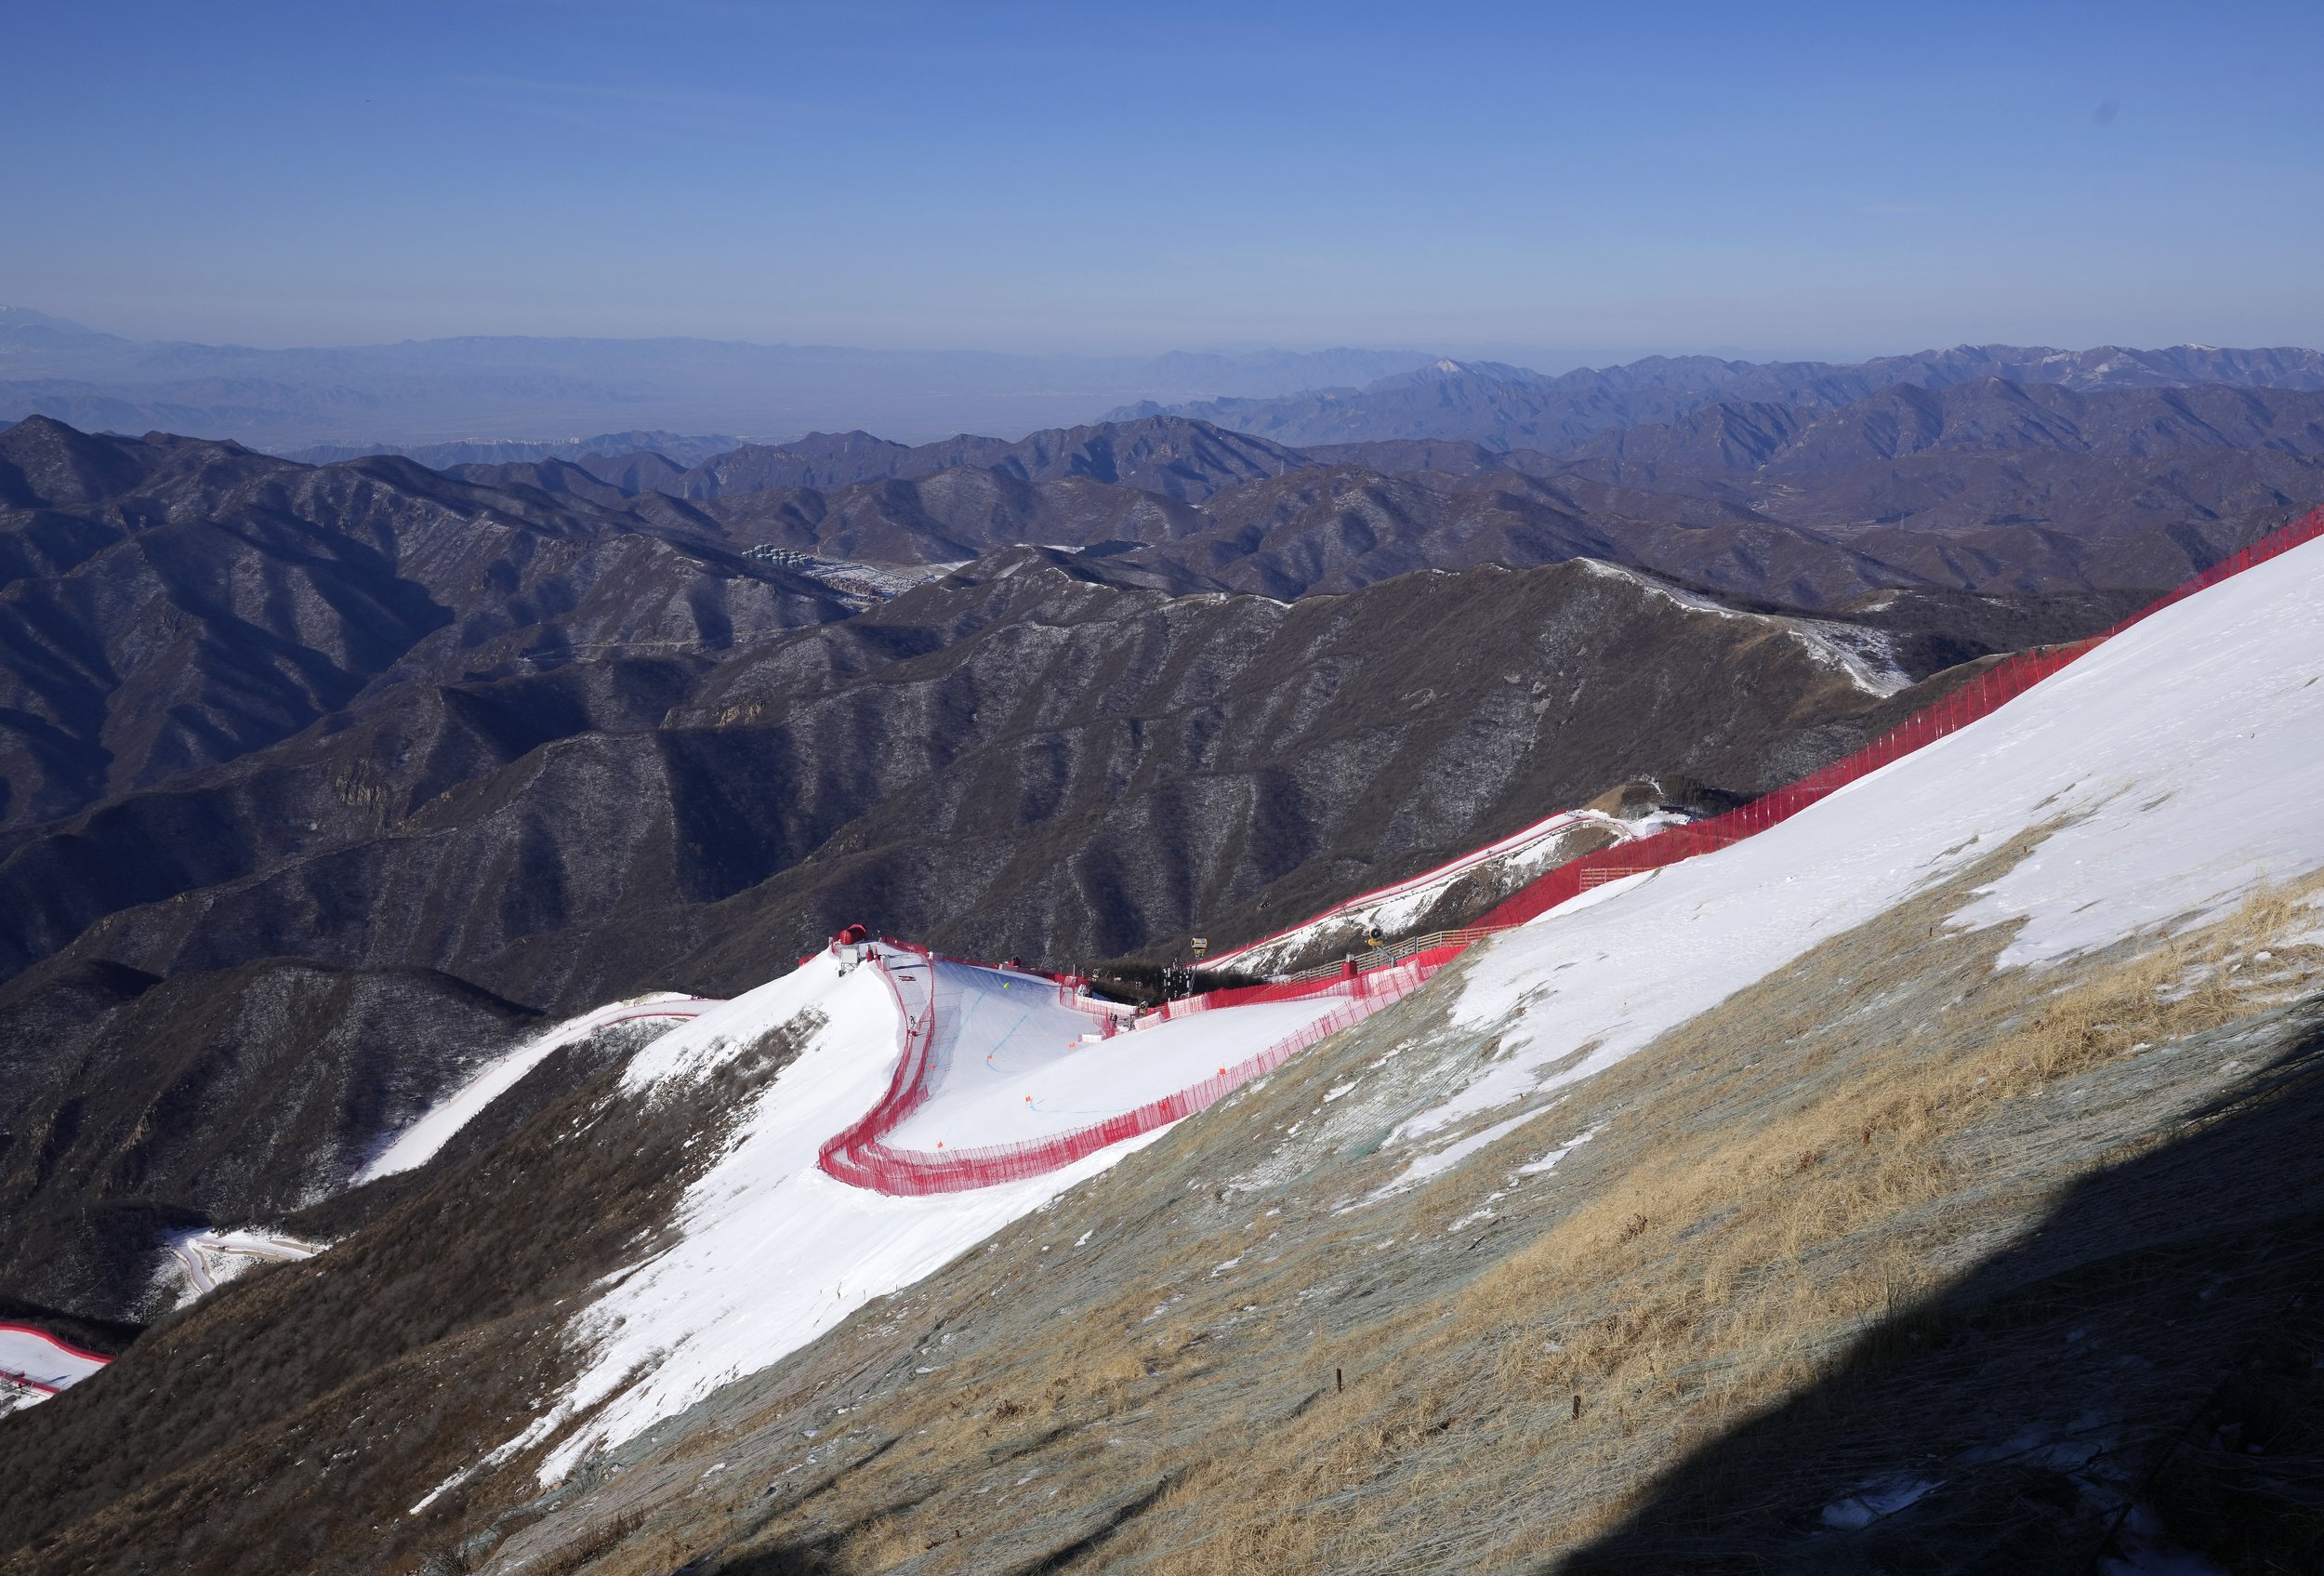  The downhill course stands out from the almost snowless landscape ahead of the first men's downhill training run at the 2022 Winter Olympics, Feb. 3, 2022, in the Yanqing district of Beijing. (AP Photo/Luca Bruno) 